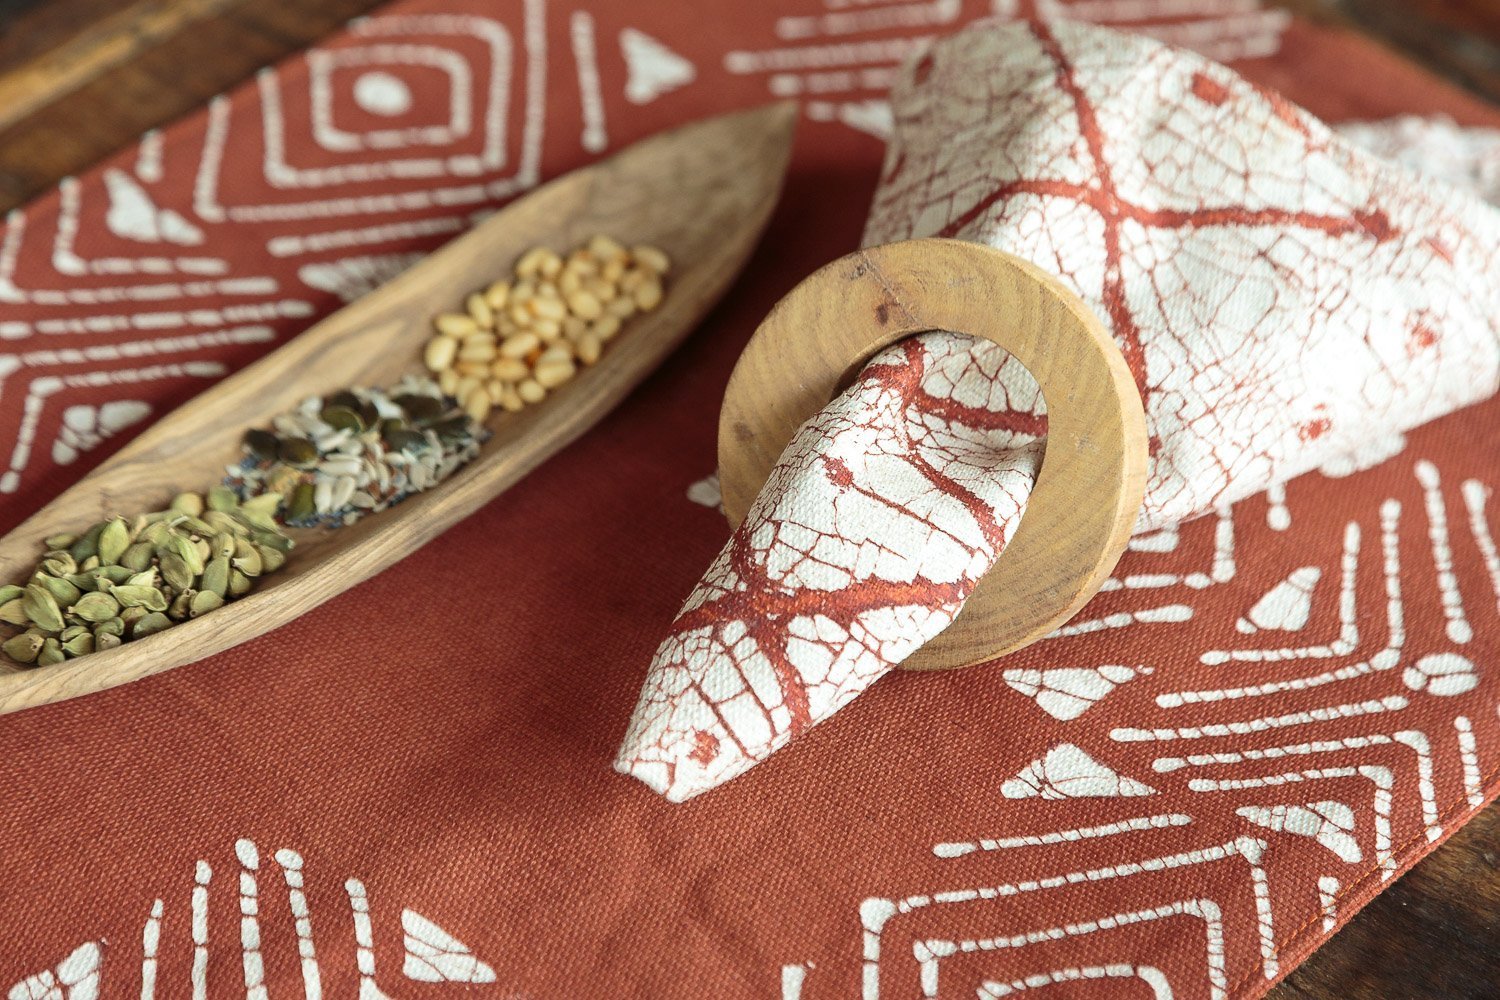 The perfect African rust napkin set, adorned with delicate geometric patterns to wow your dinner guests.